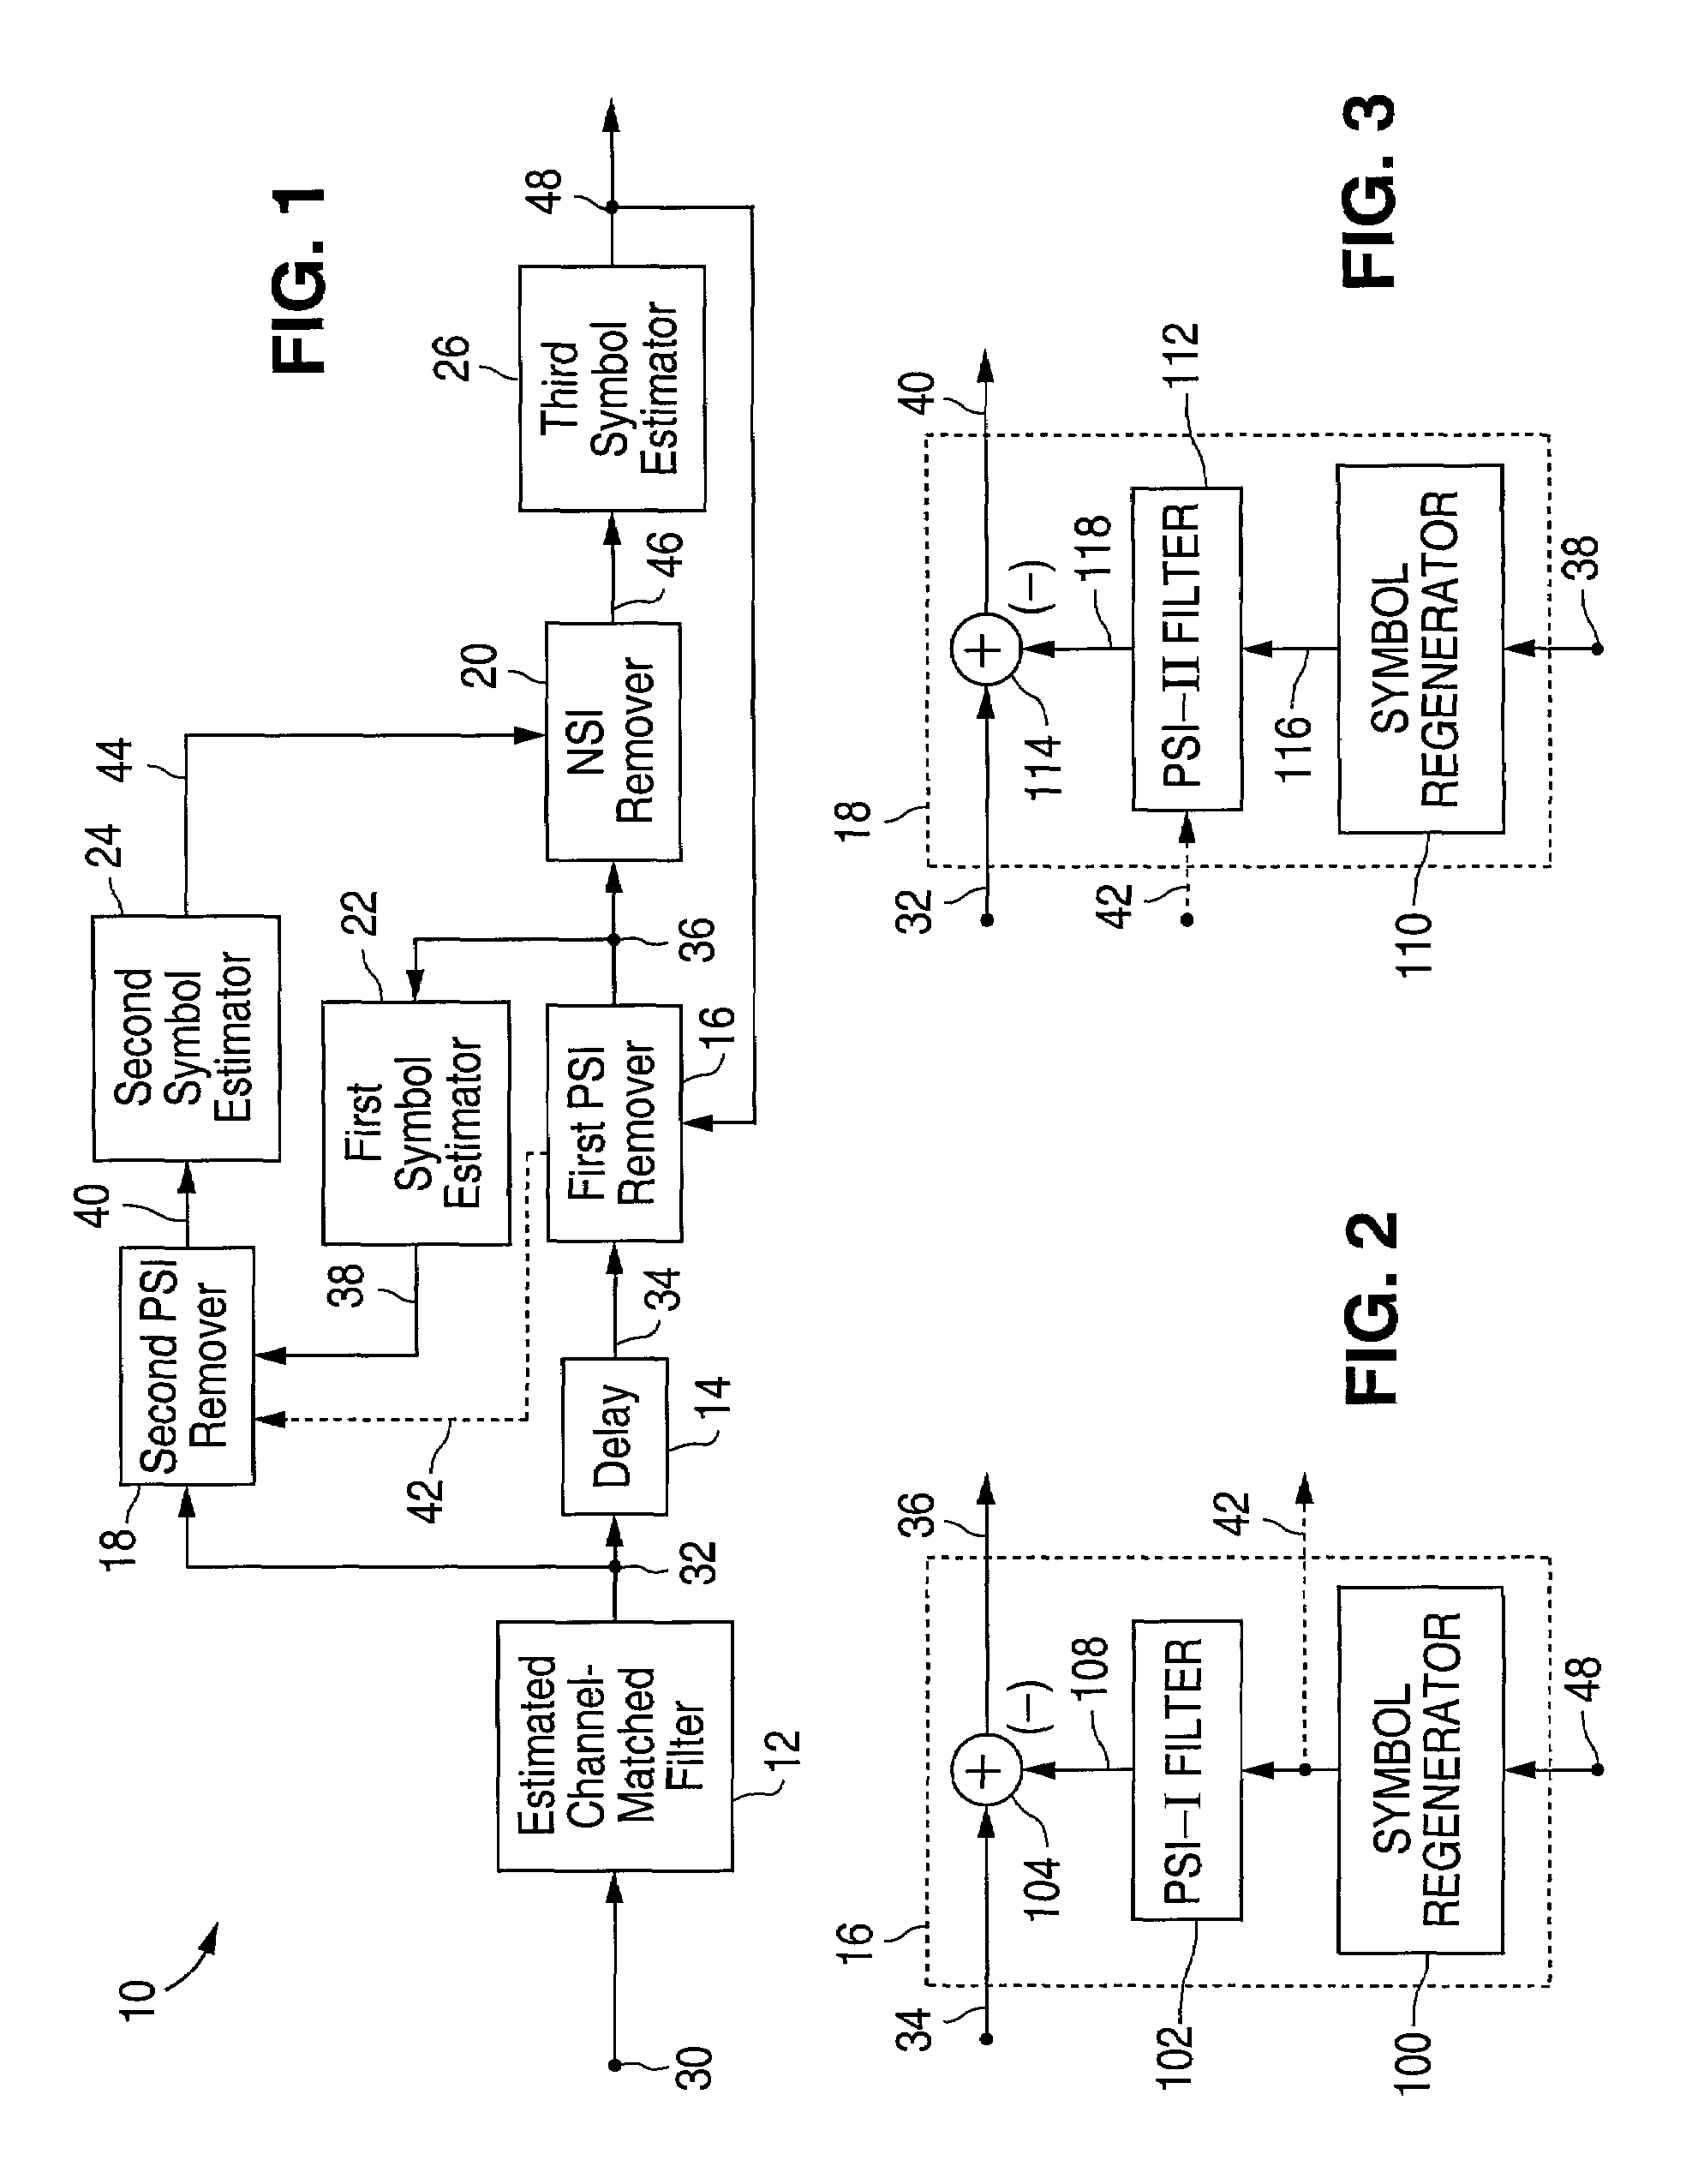 Method and system for providing maximum likelihood detection with decision feedback interference cancellation